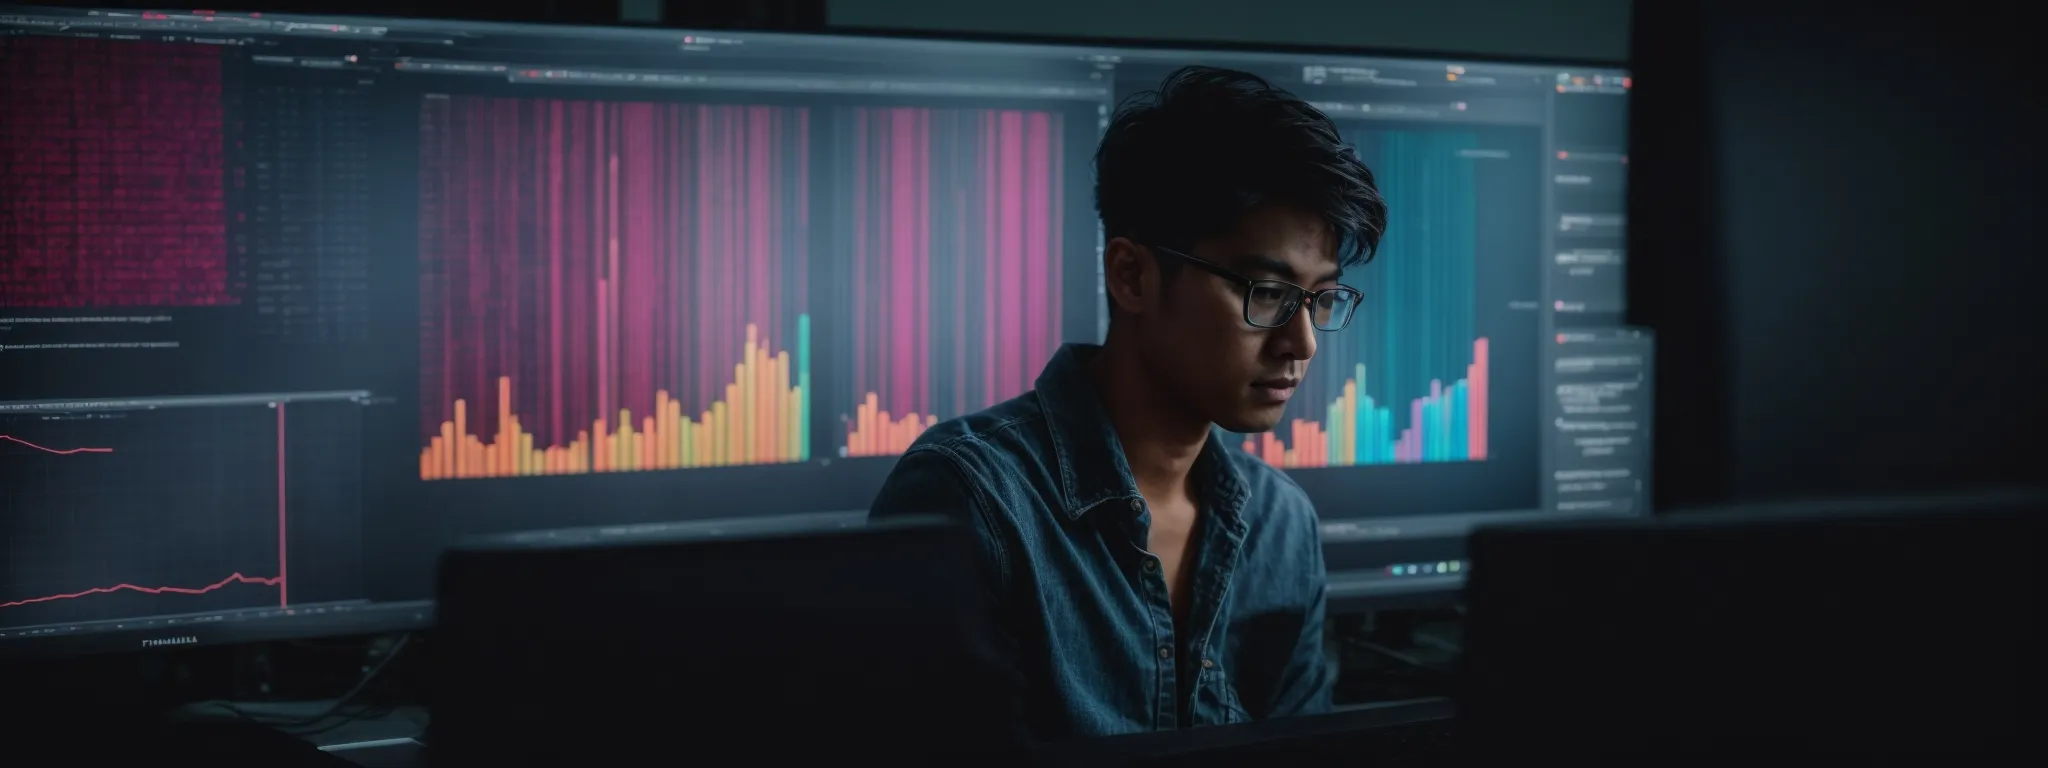 a person peers intently at a computer screen, where colorful graphs and charts illustrate search term trends and keyword analytics.